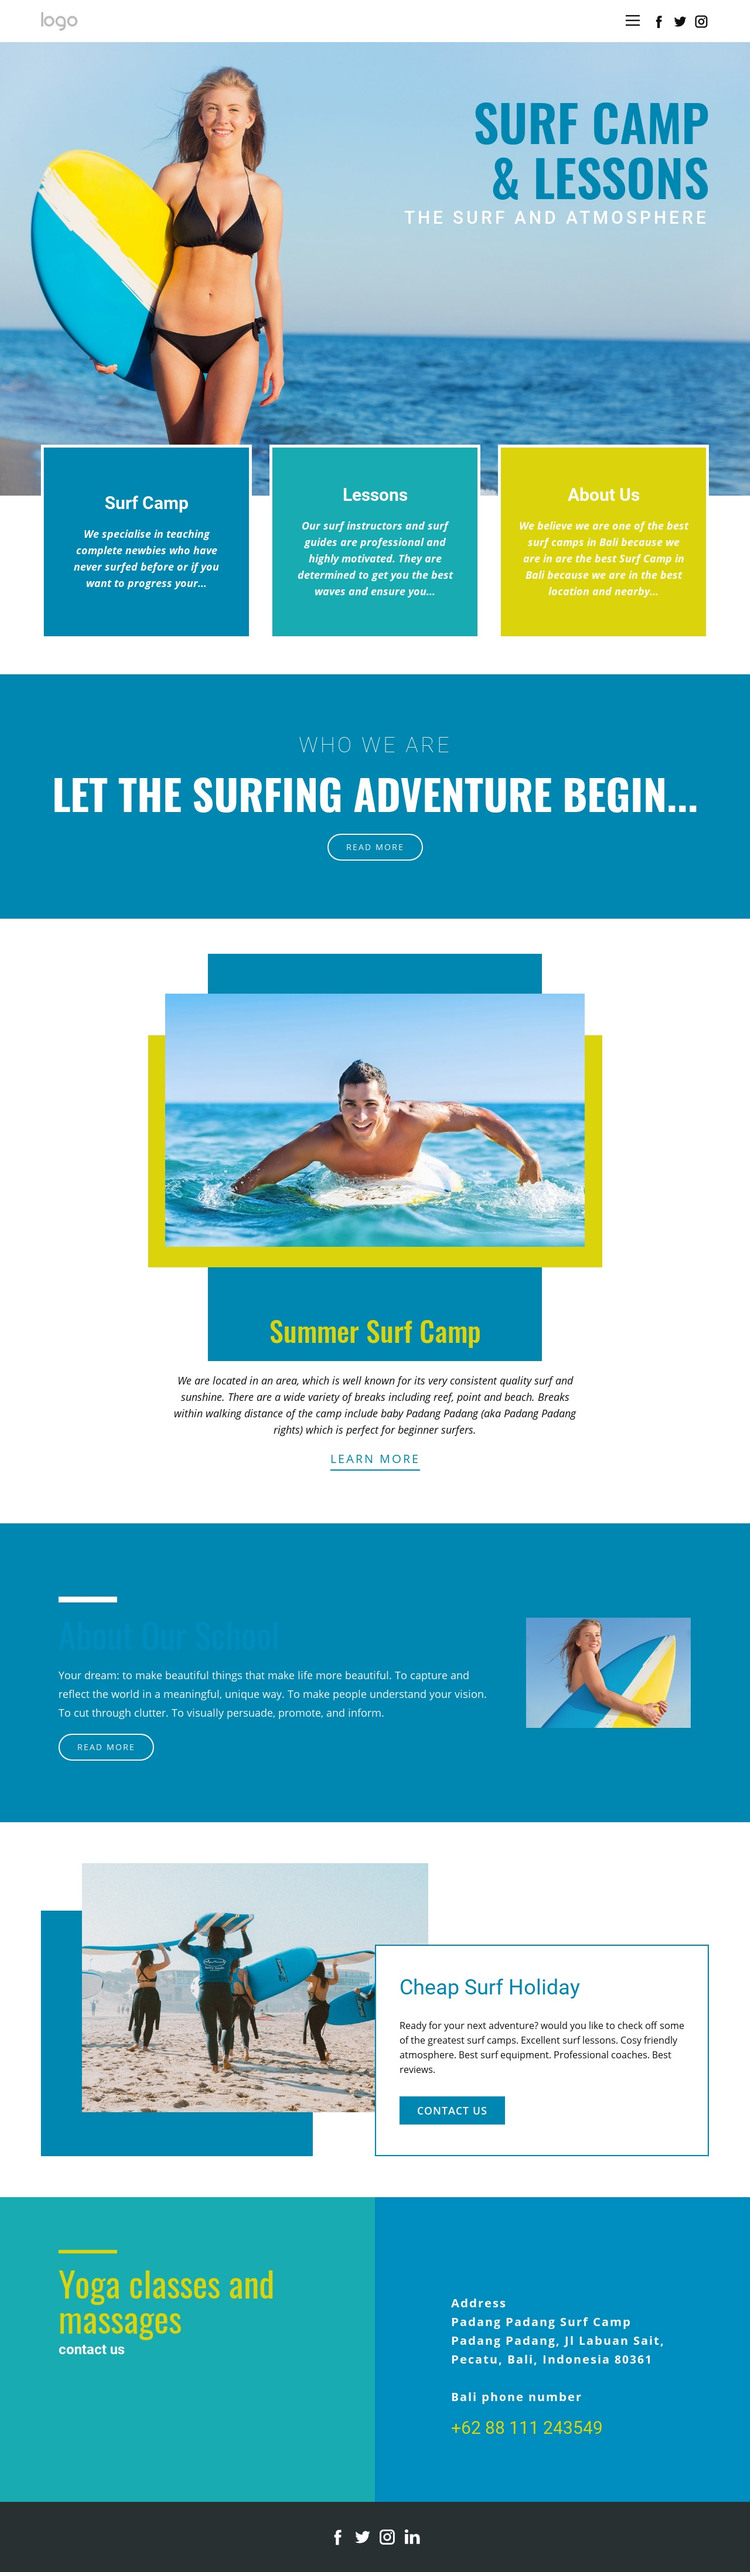 Camp for summer sports Homepage Design